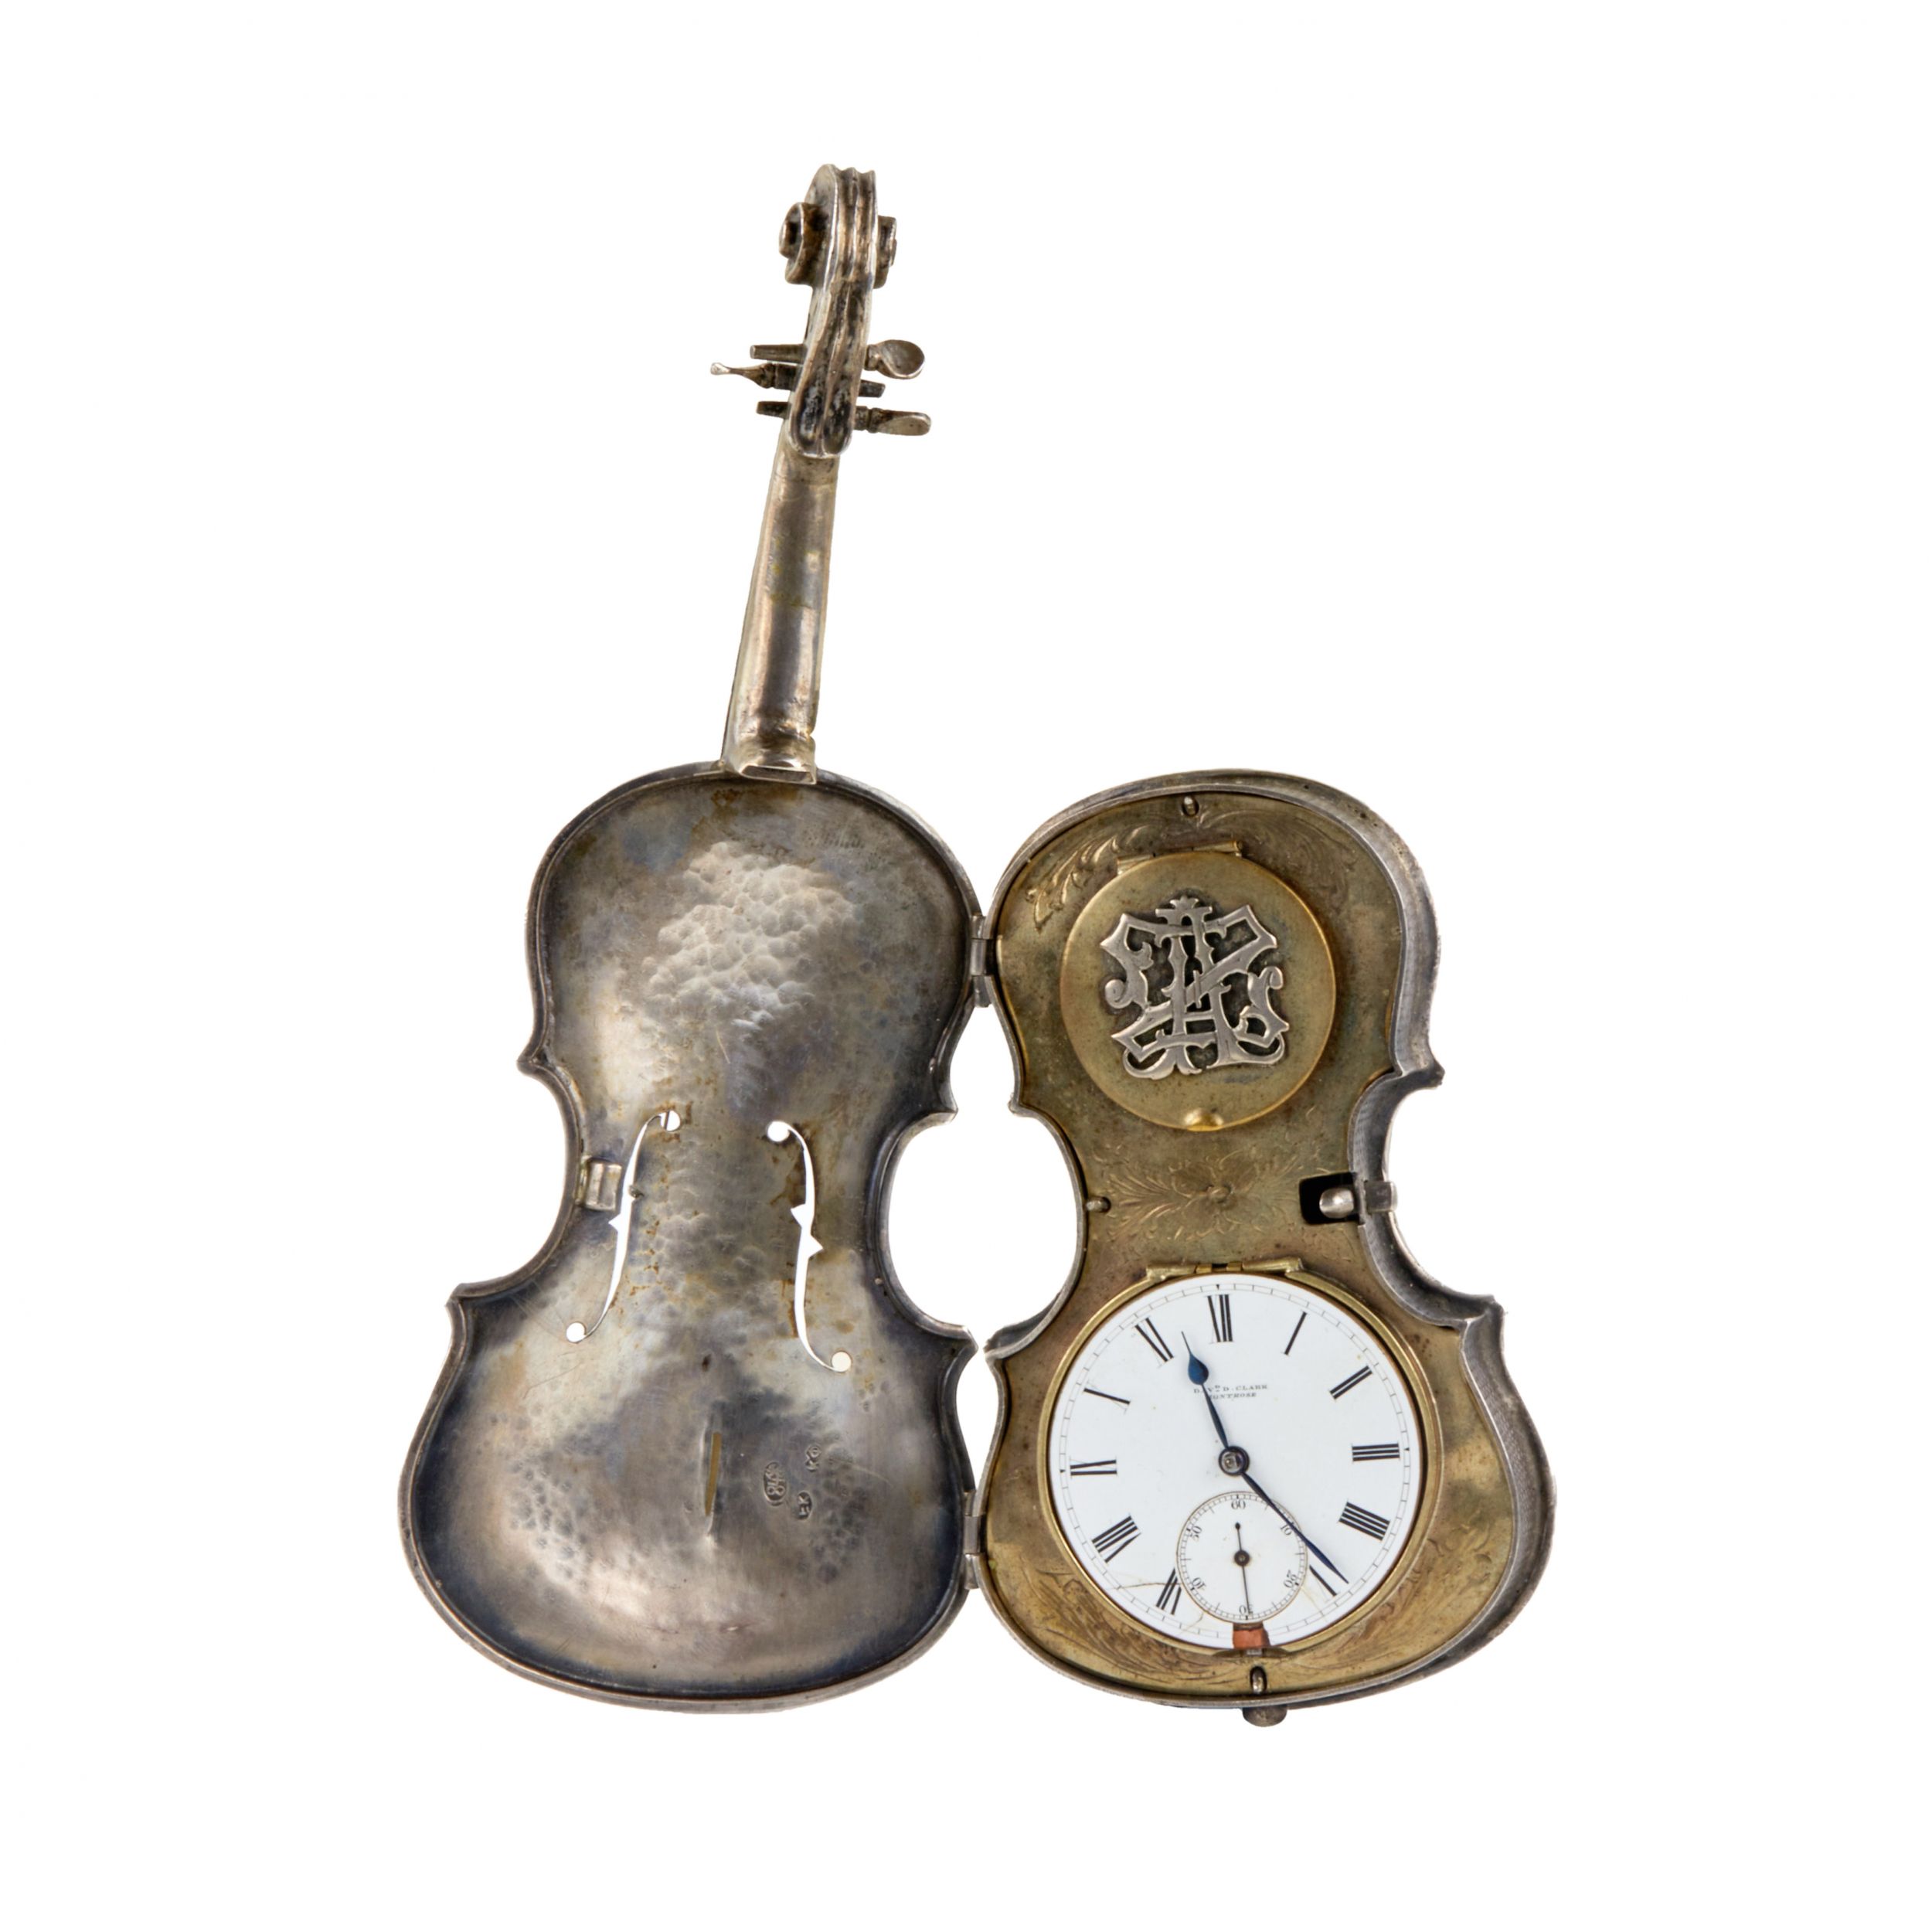 Pocket-watch-in-a-silver-case-in-the-shape-of-a-violin-St-Petersburg-1870-80s-